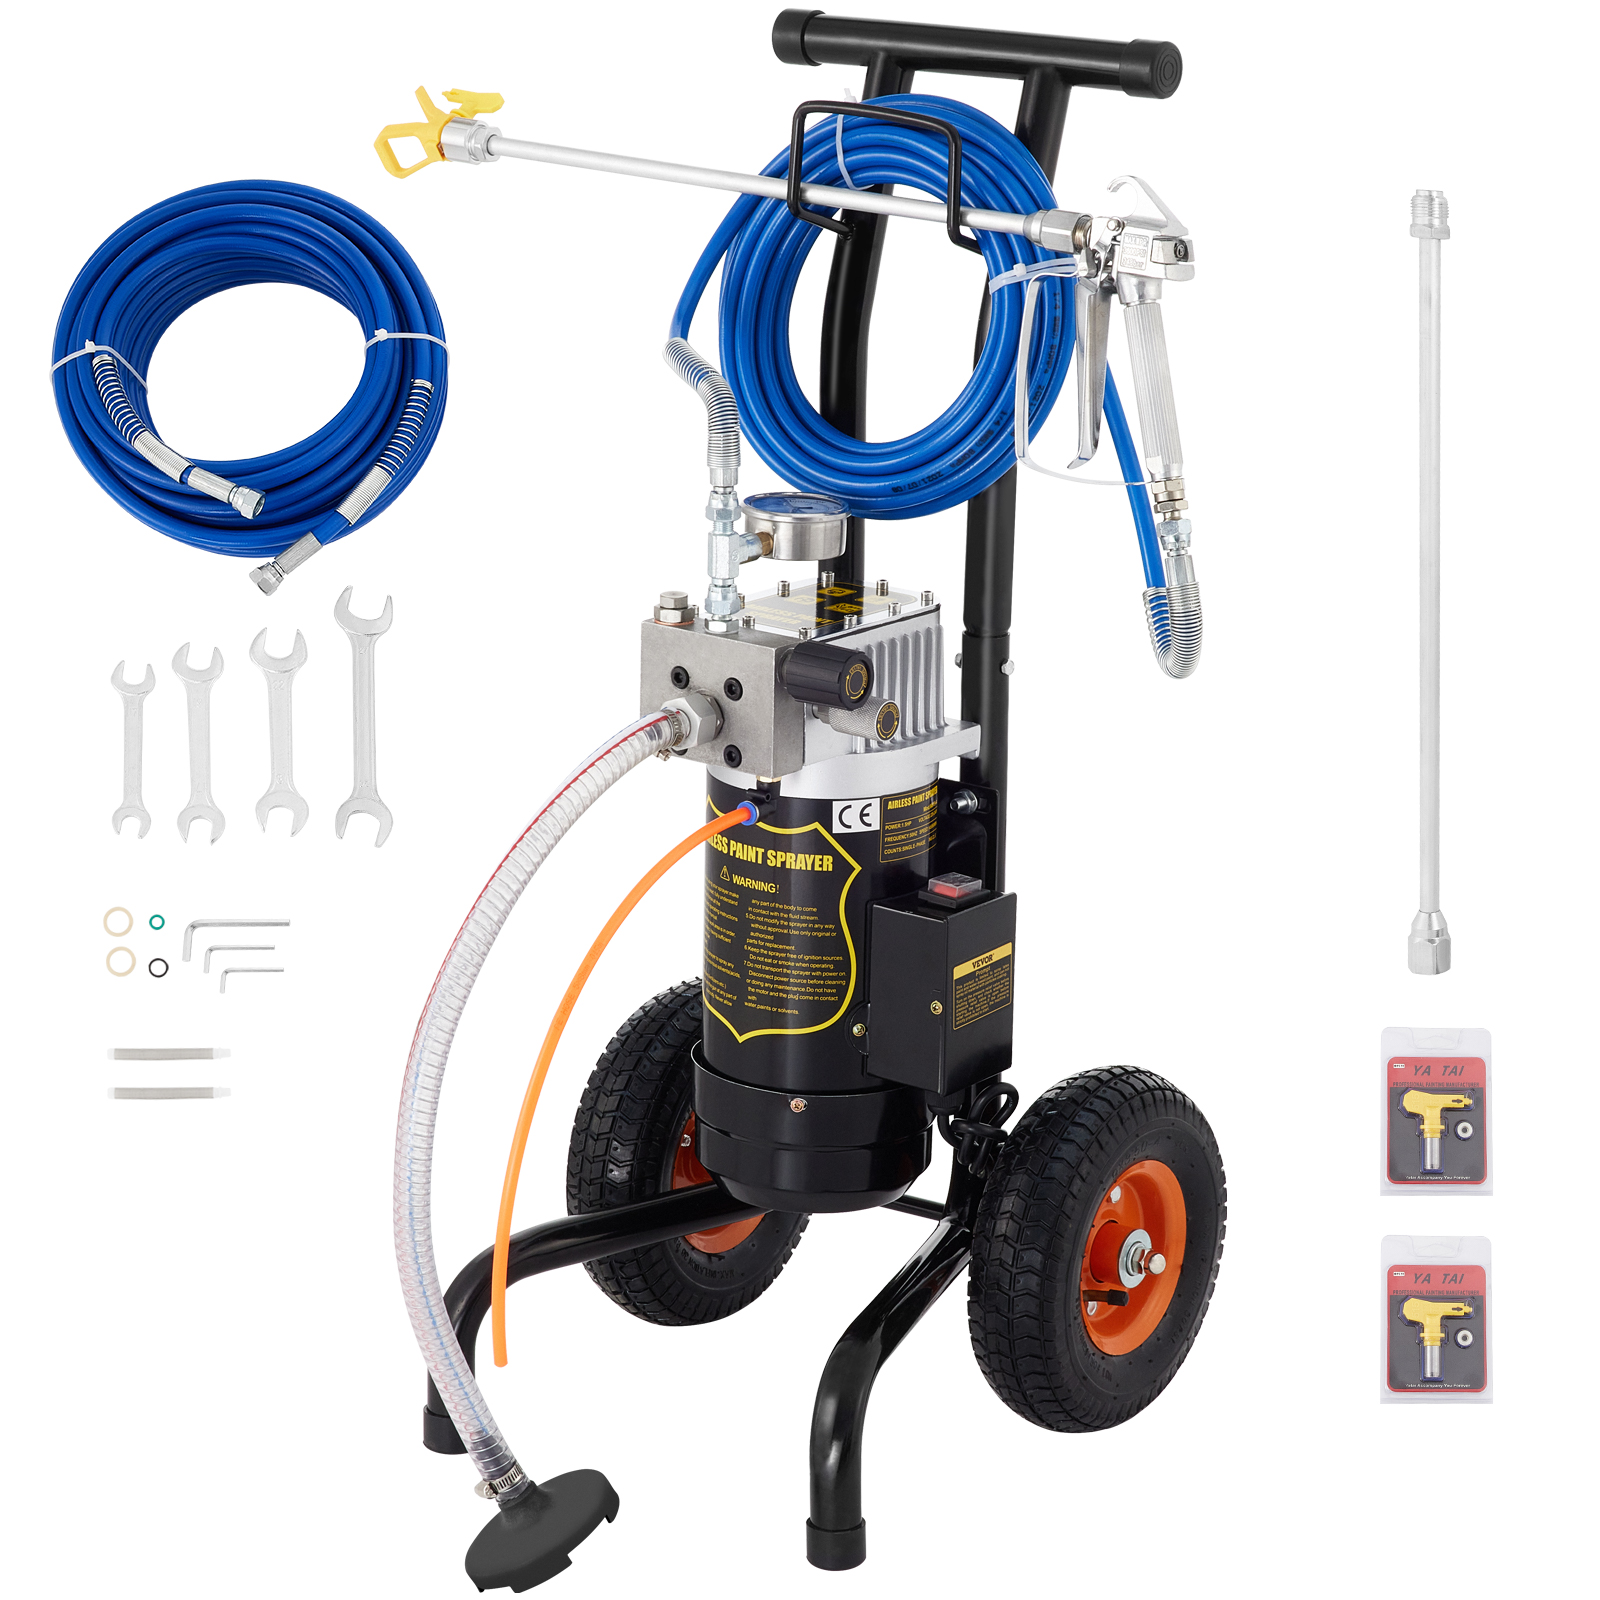 VEVOR VEVOR 1.5HP Airless Paint Sprayer, 3200PSI Pressure Airless Sprayer  ,Wall Paint Gun Sprayer with 15 M Hose, Spraying Machine with Two Set Hose  for Wall & Ceiling/Wood & Metal Paint